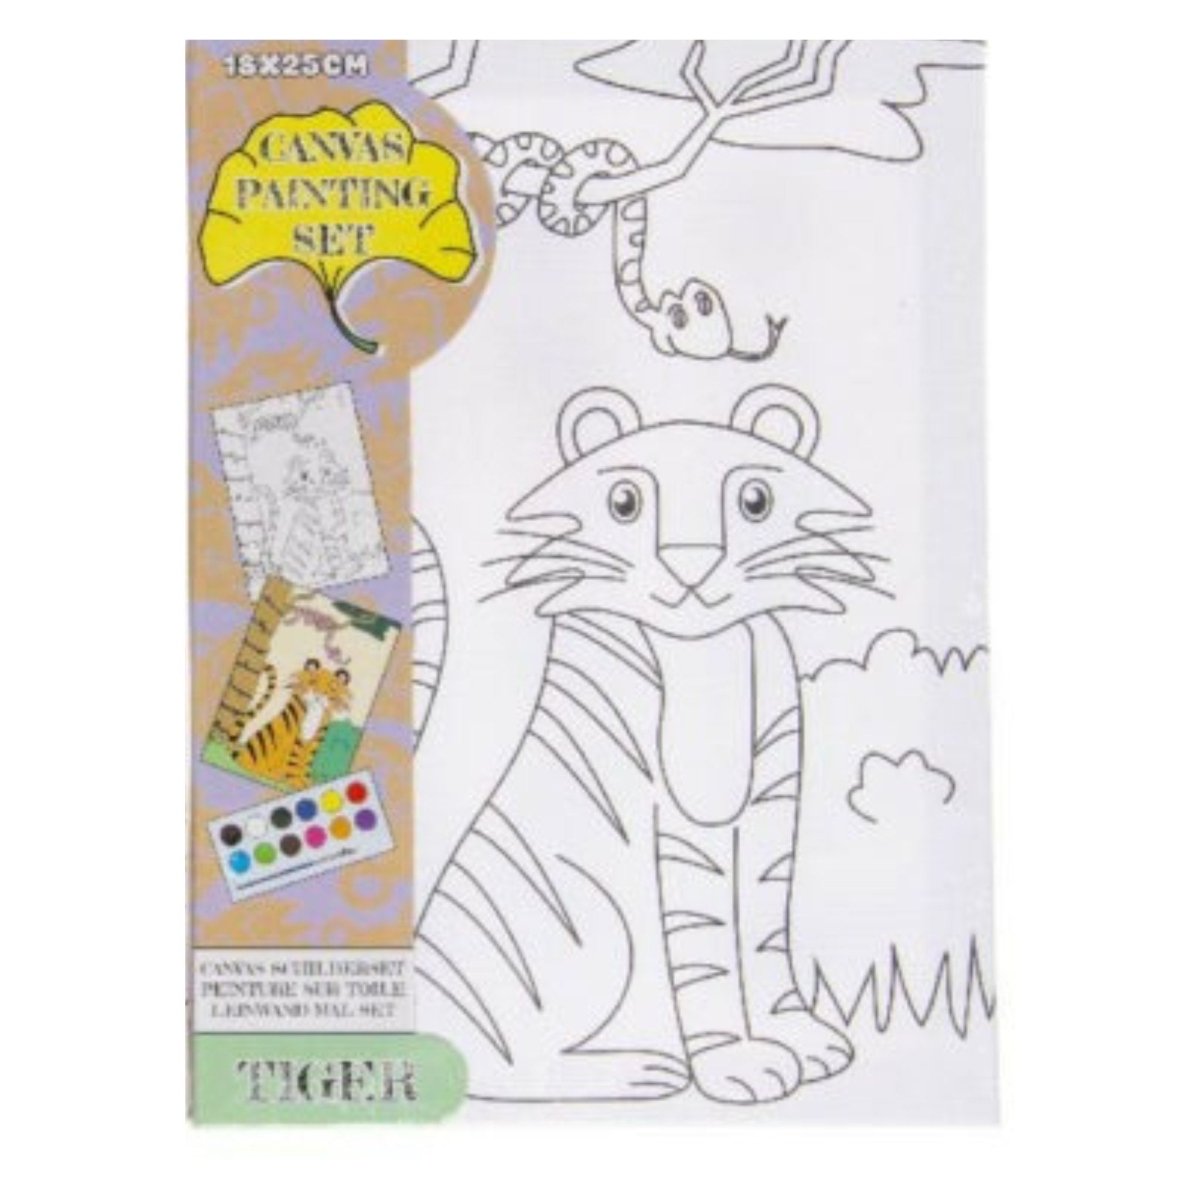 Tiger Deluxe Canvas Painting Set - Kids Party Craft